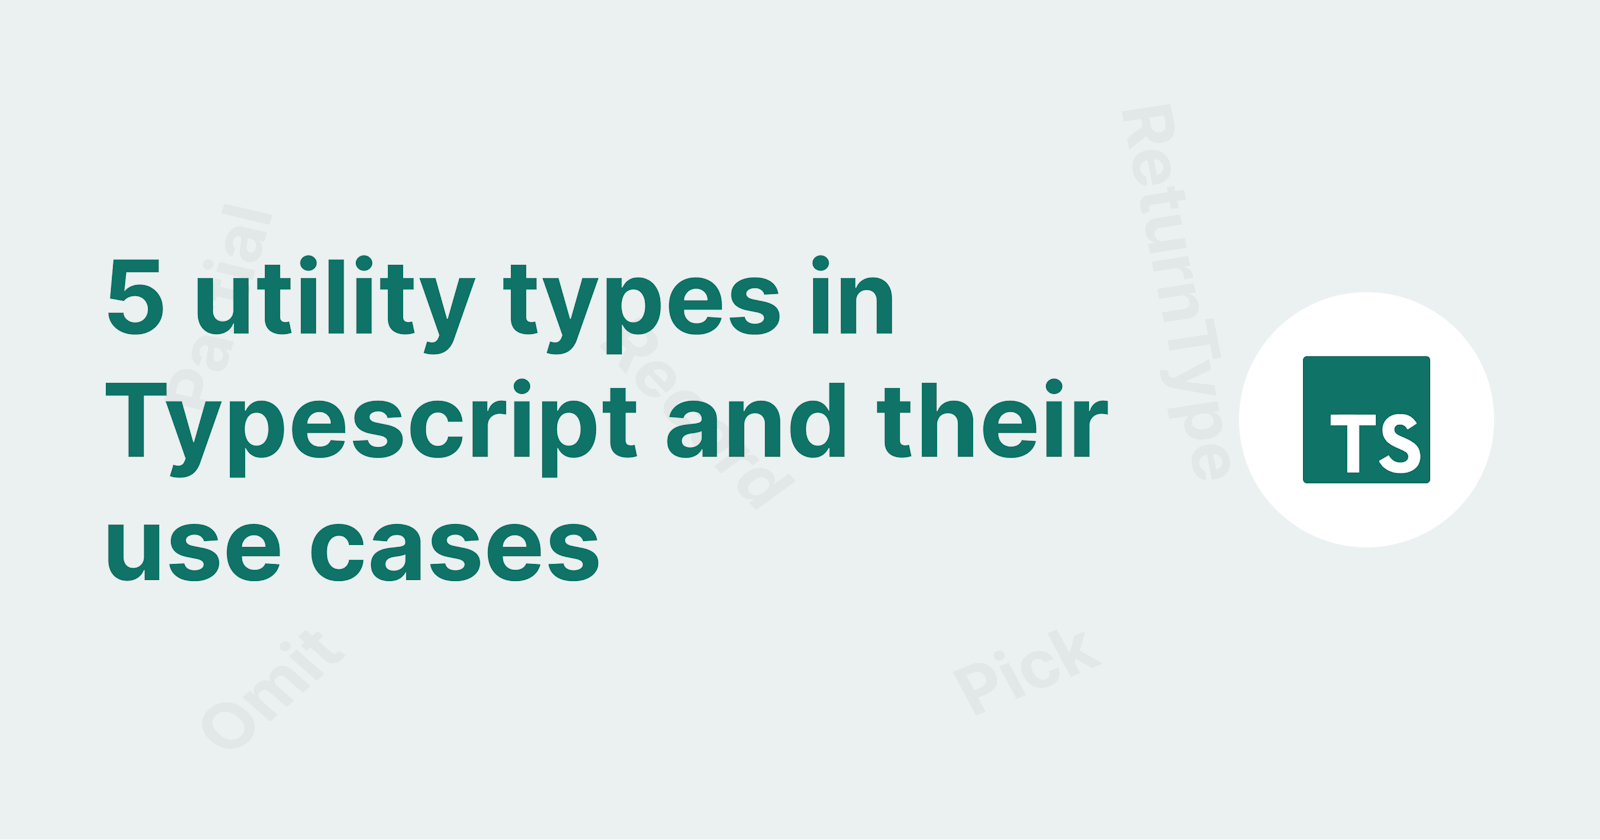 5 utility types in Typescript and their use cases.